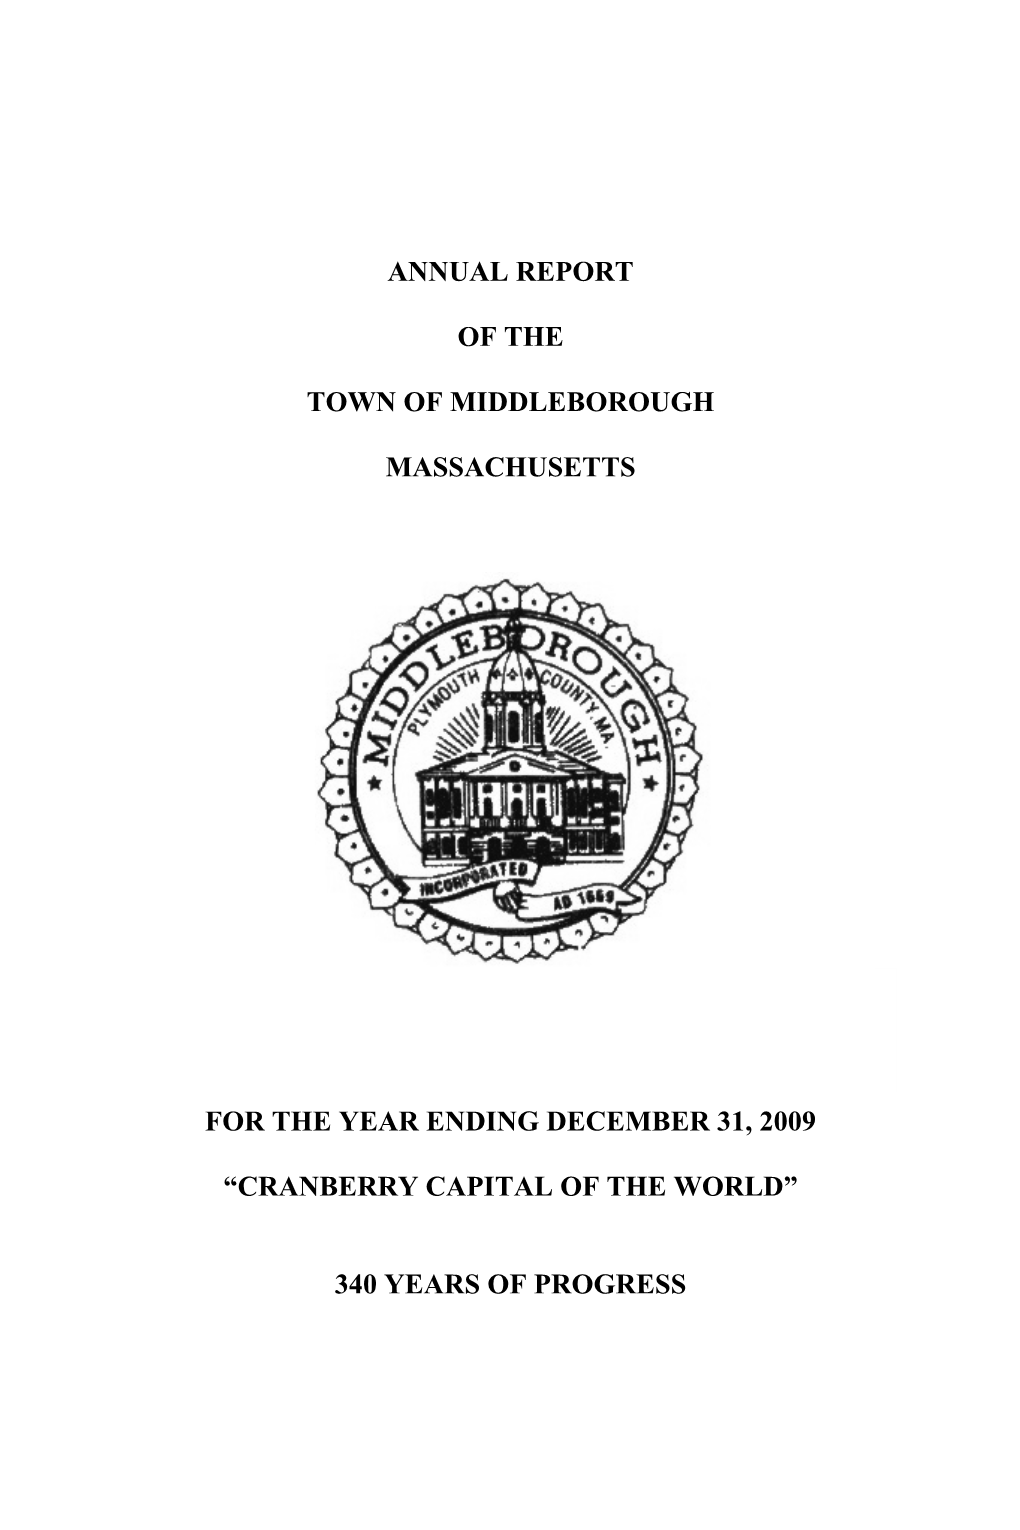 Annual Report of the Town of Middleborough